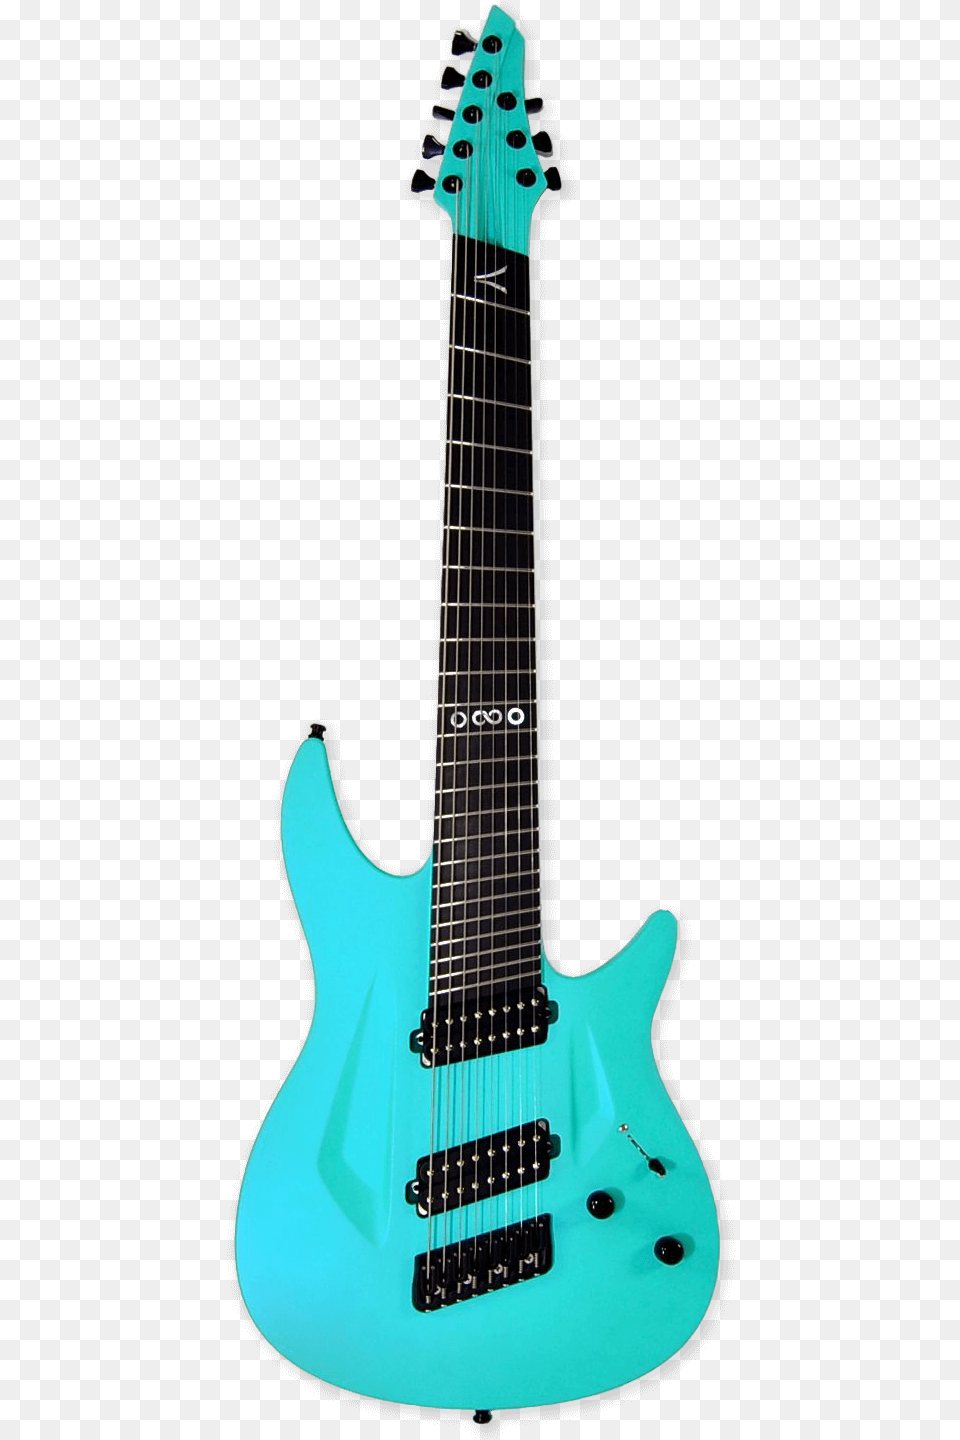 I Donu0027t Buy Guitarsgear Much Anymore But The Gear, Electric Guitar, Guitar, Musical Instrument Free Png